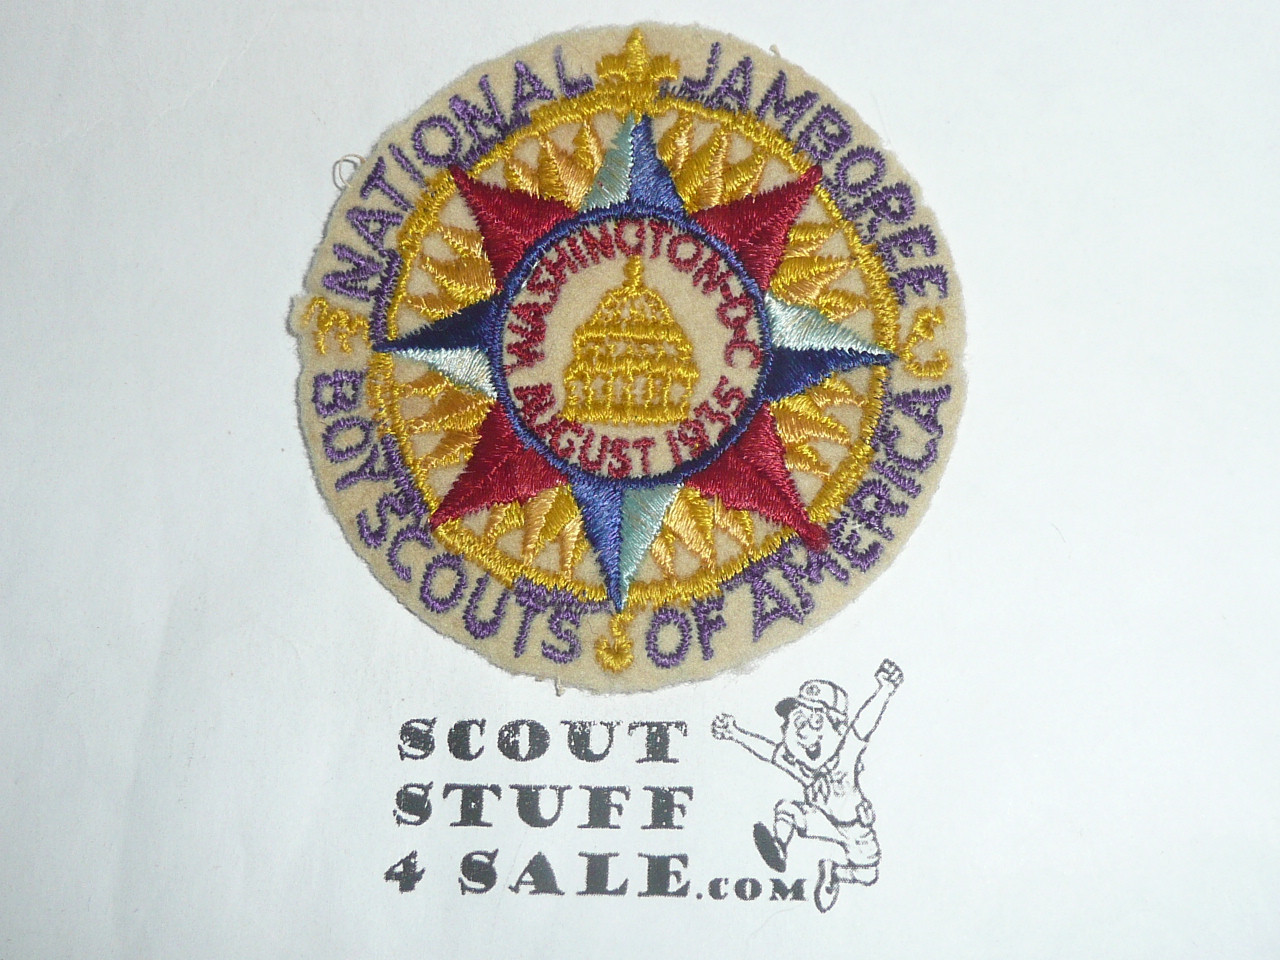 1935 National Jamboree Patch, lite use with no mothing